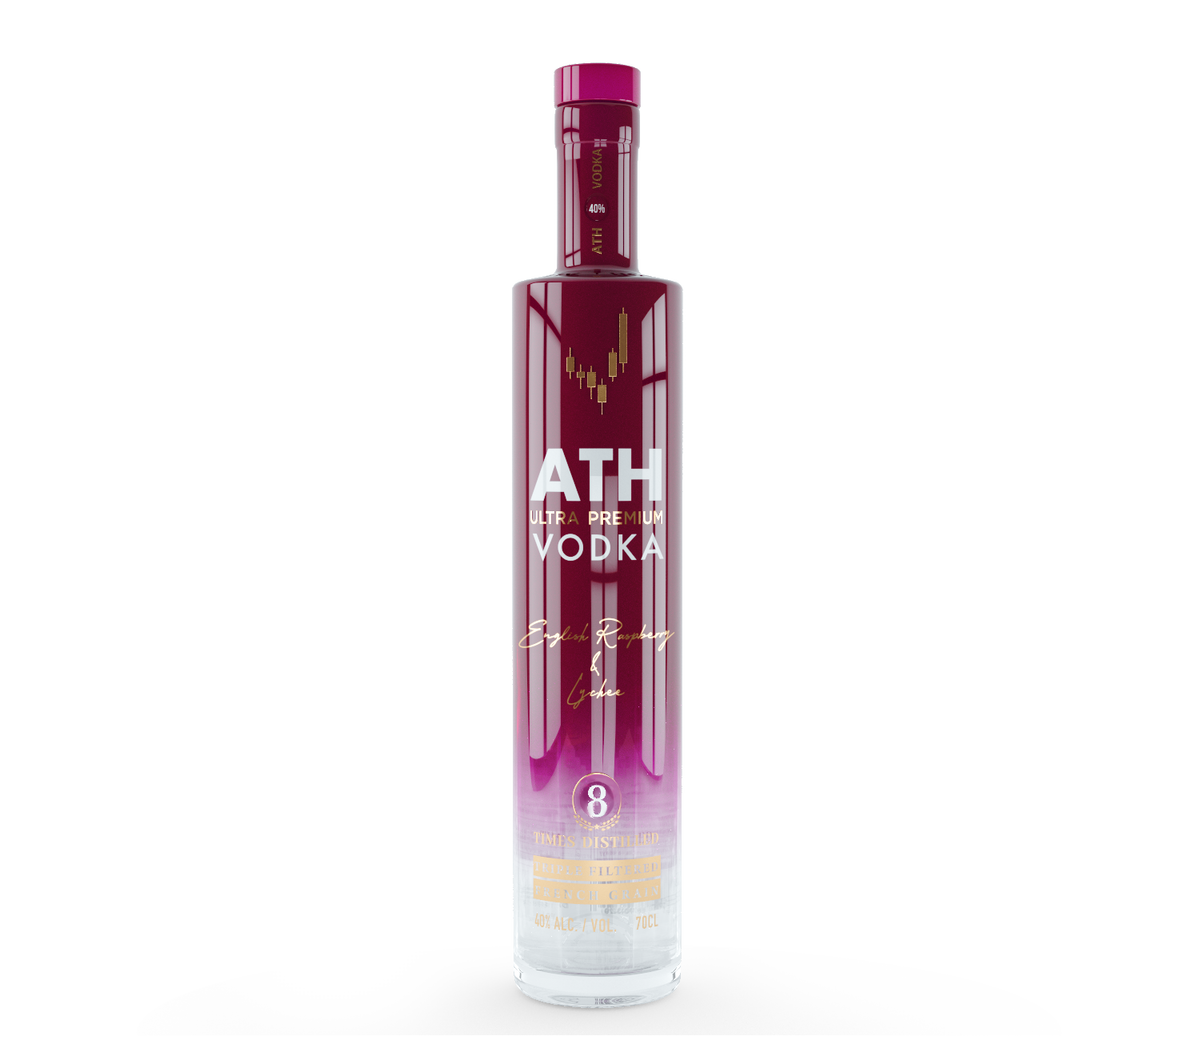 ATH Vodka is handcrafted and produced with the utmost care to ensure it meets the highest standards. We source the best quality French grain to create a truly exceptional ultra premium vodka with the smoothest finish.